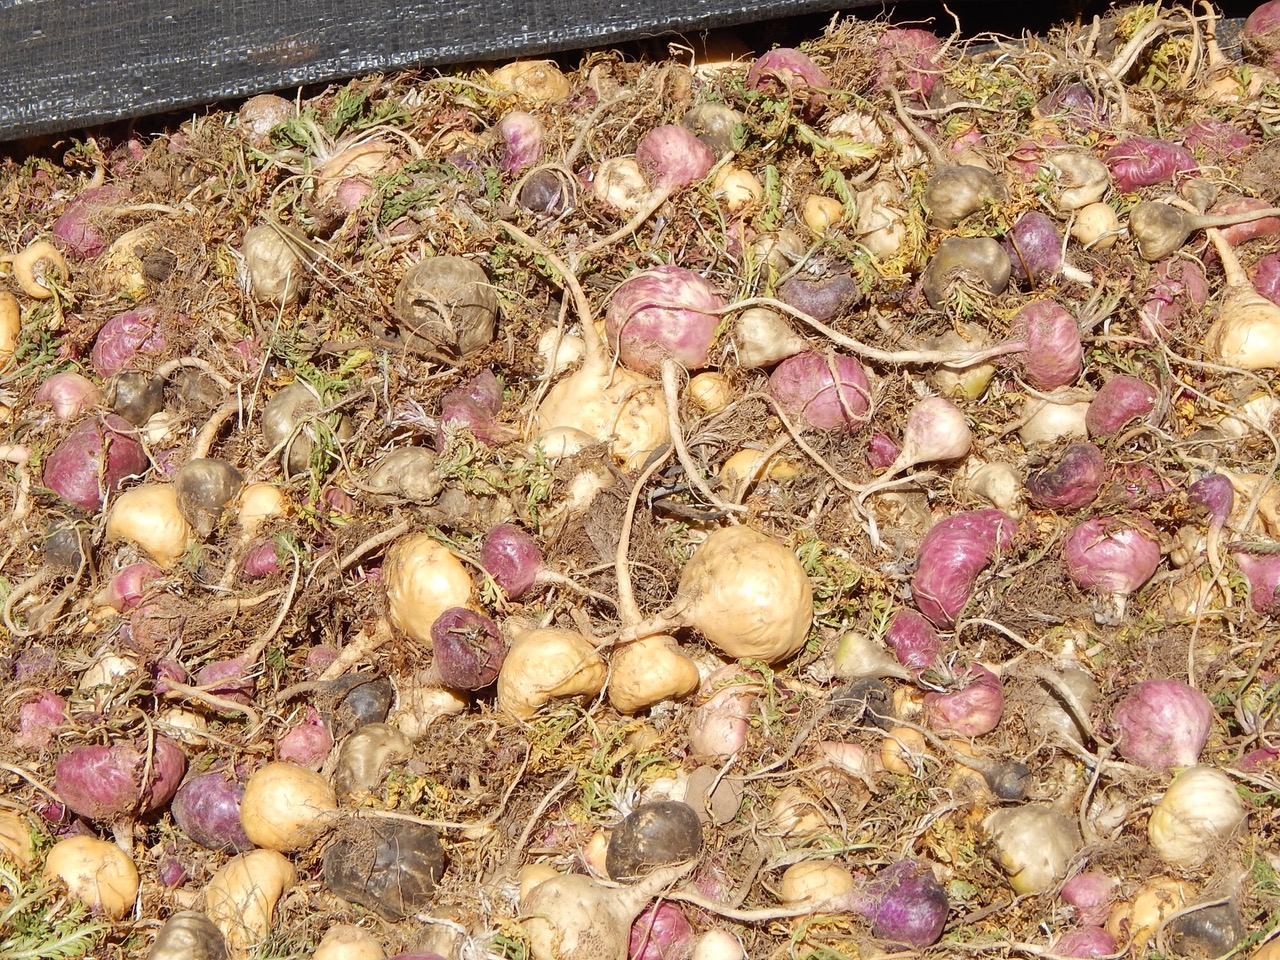 Maca is a powerful rugged root